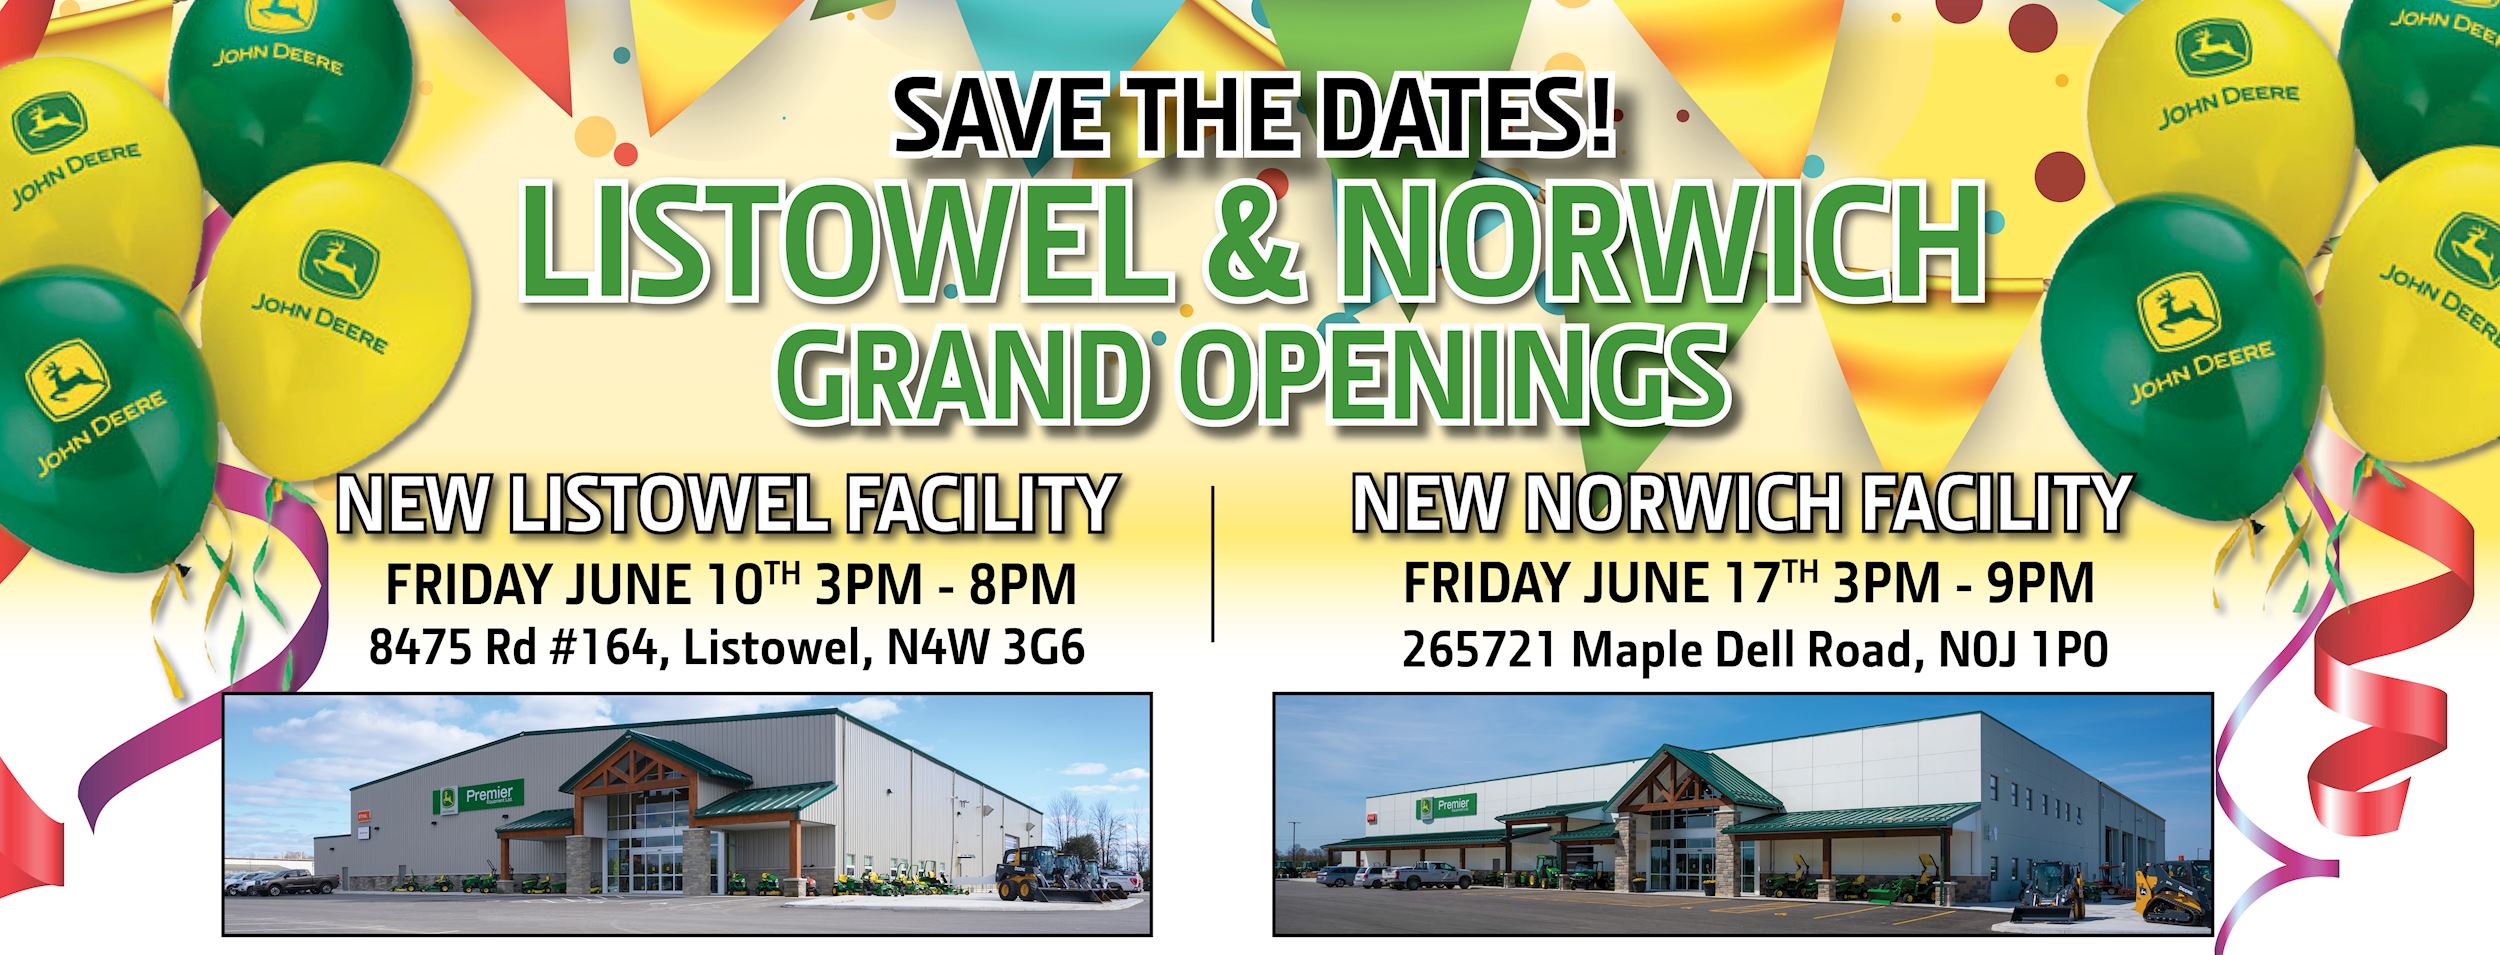 Listowel and Norwich Grand Opening